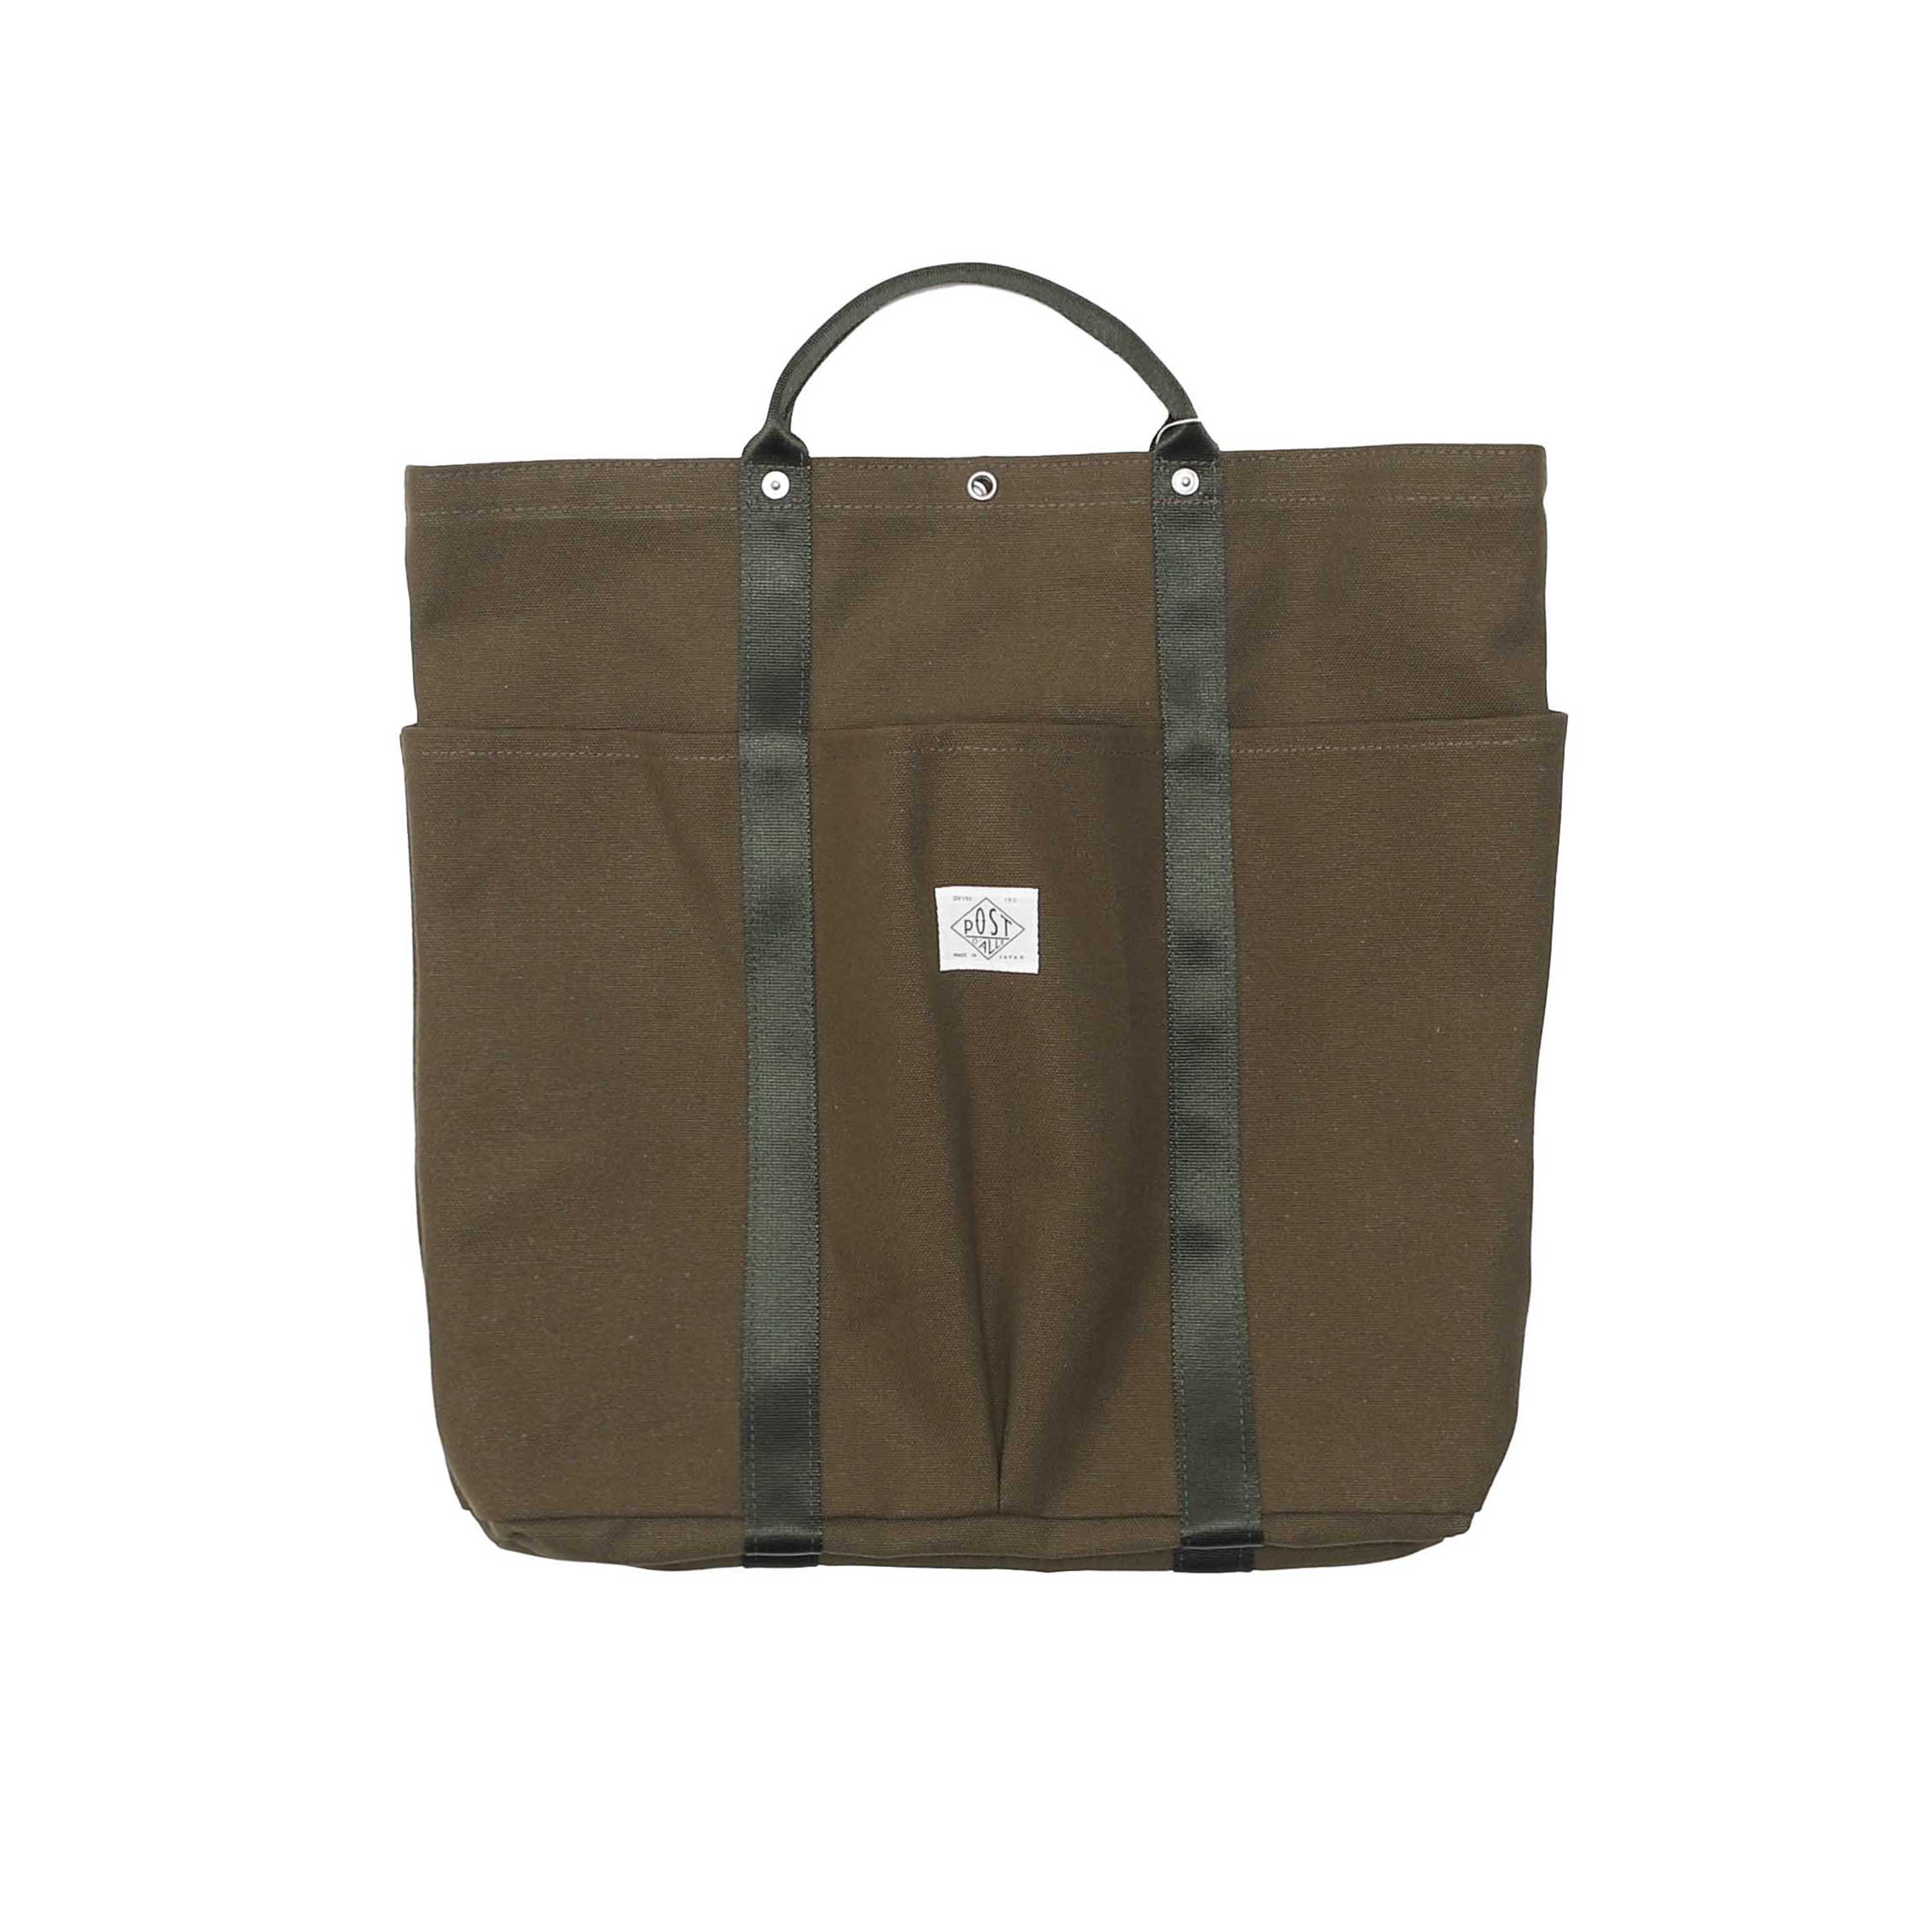 POST-TOTE 2 - OLIVE